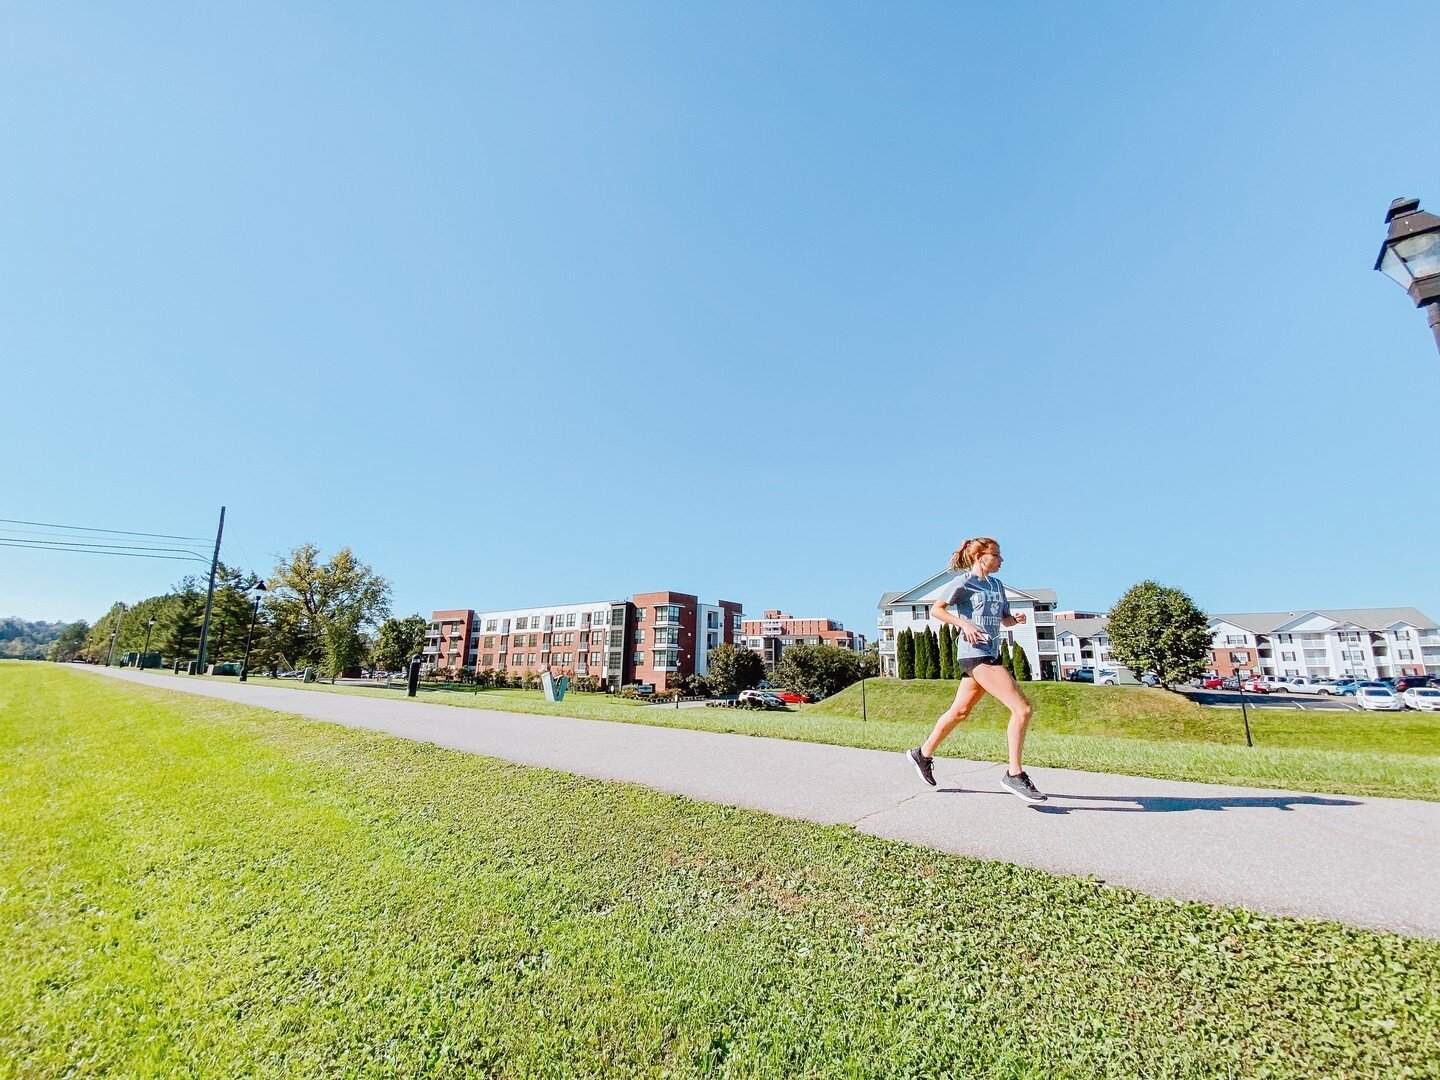 Located right next to the Athens Bike Trail,  We have the BEST LOCATION for students of @ohio.university 🚲 🌳 ✅ ⁠
⁠
Access all of campus in minutes, take a ride or walk on the trail all the way to West Green!